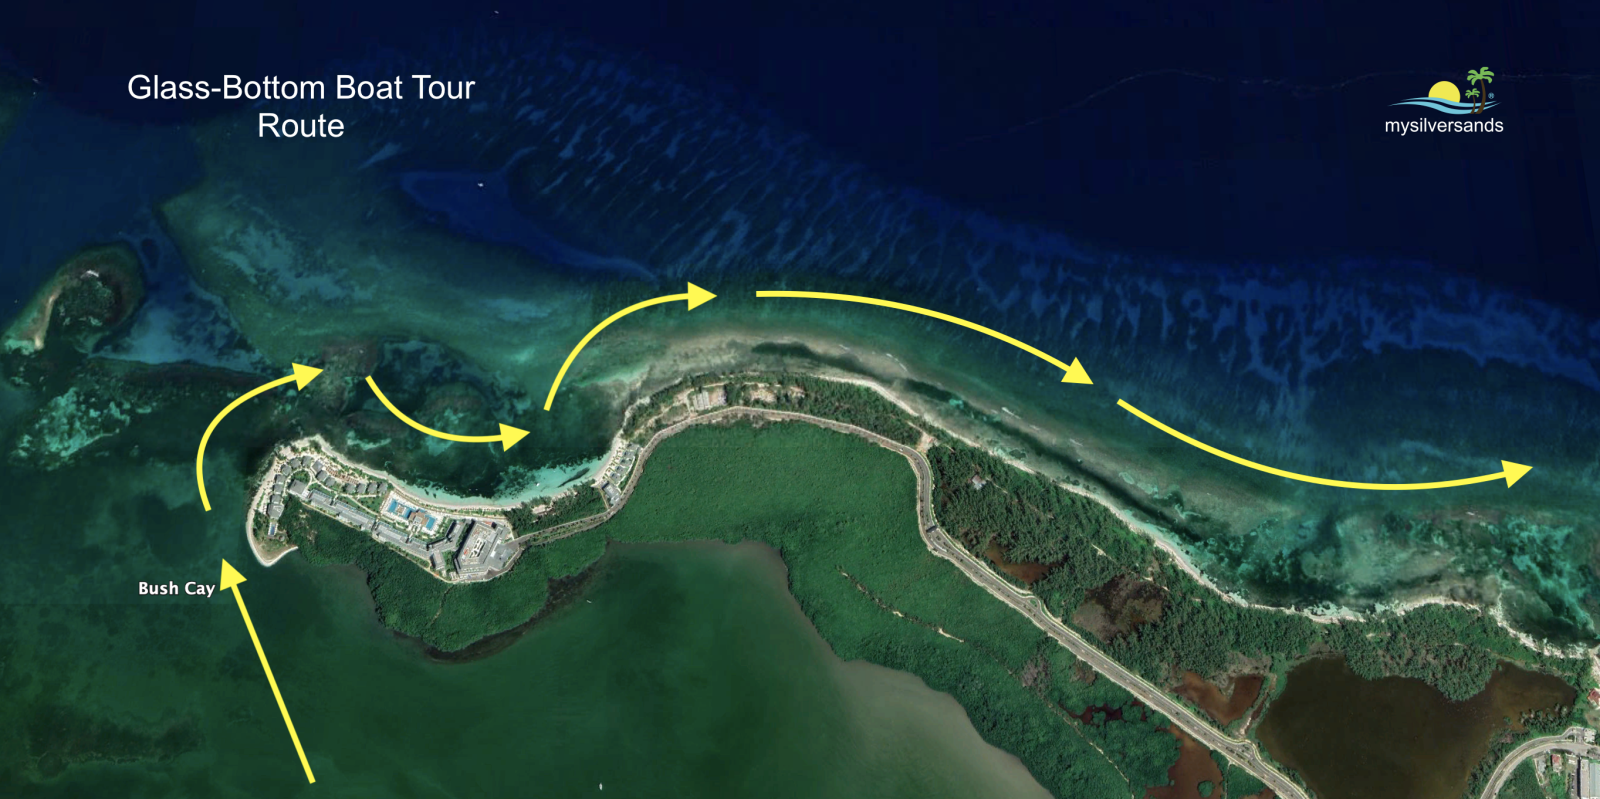 route of the glass-bottom boat tour